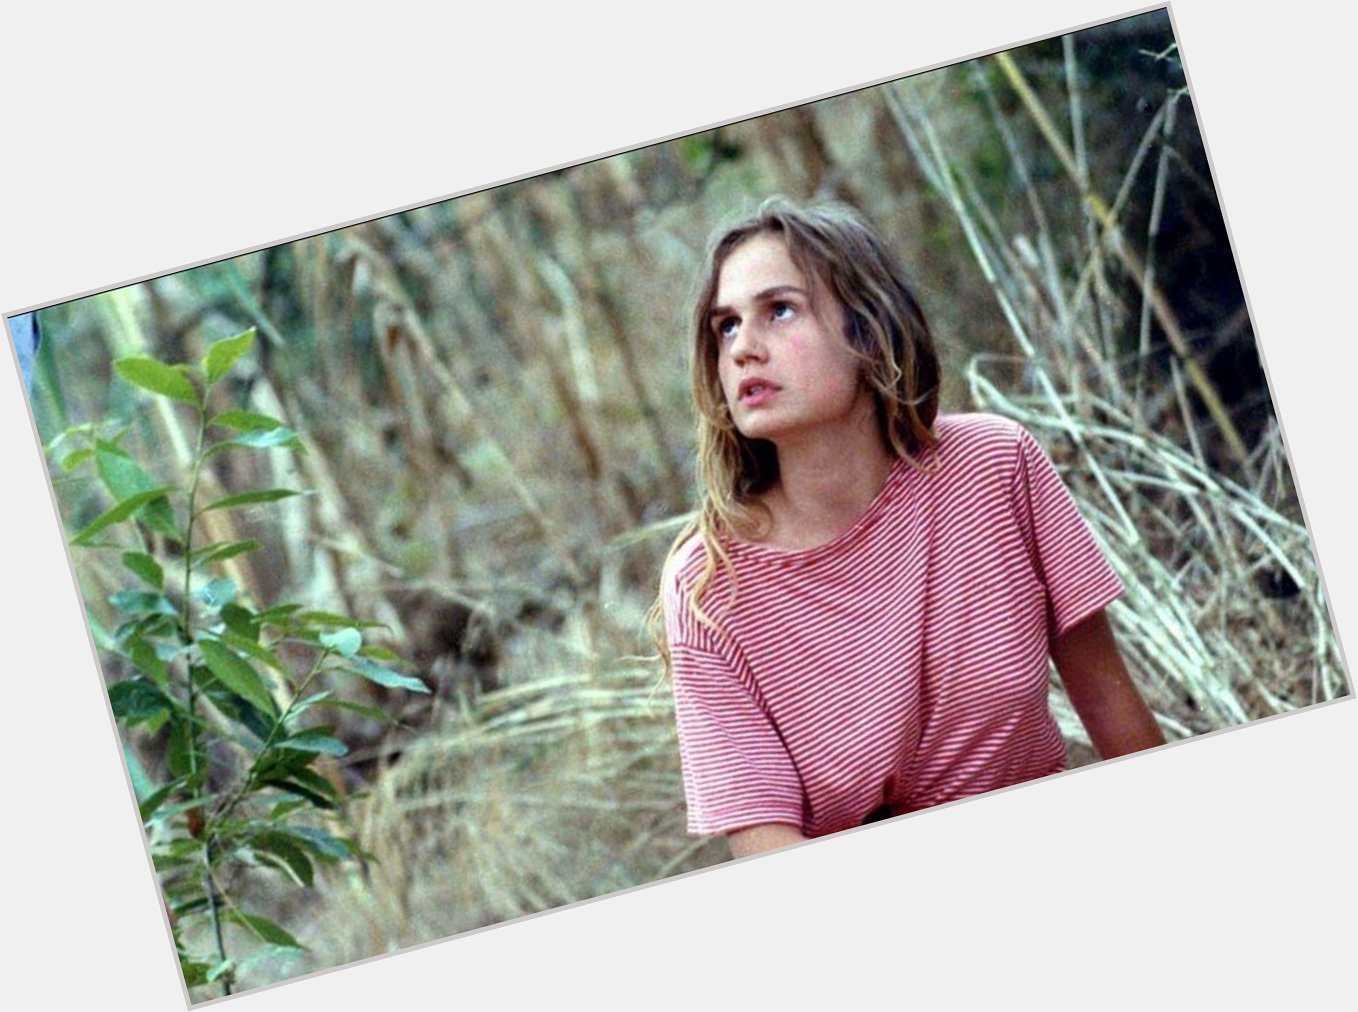 Happy Birthday to Sandrine Bonnaire! Is there a better debut and follow-up than A Nos Amours and Vagabond? 